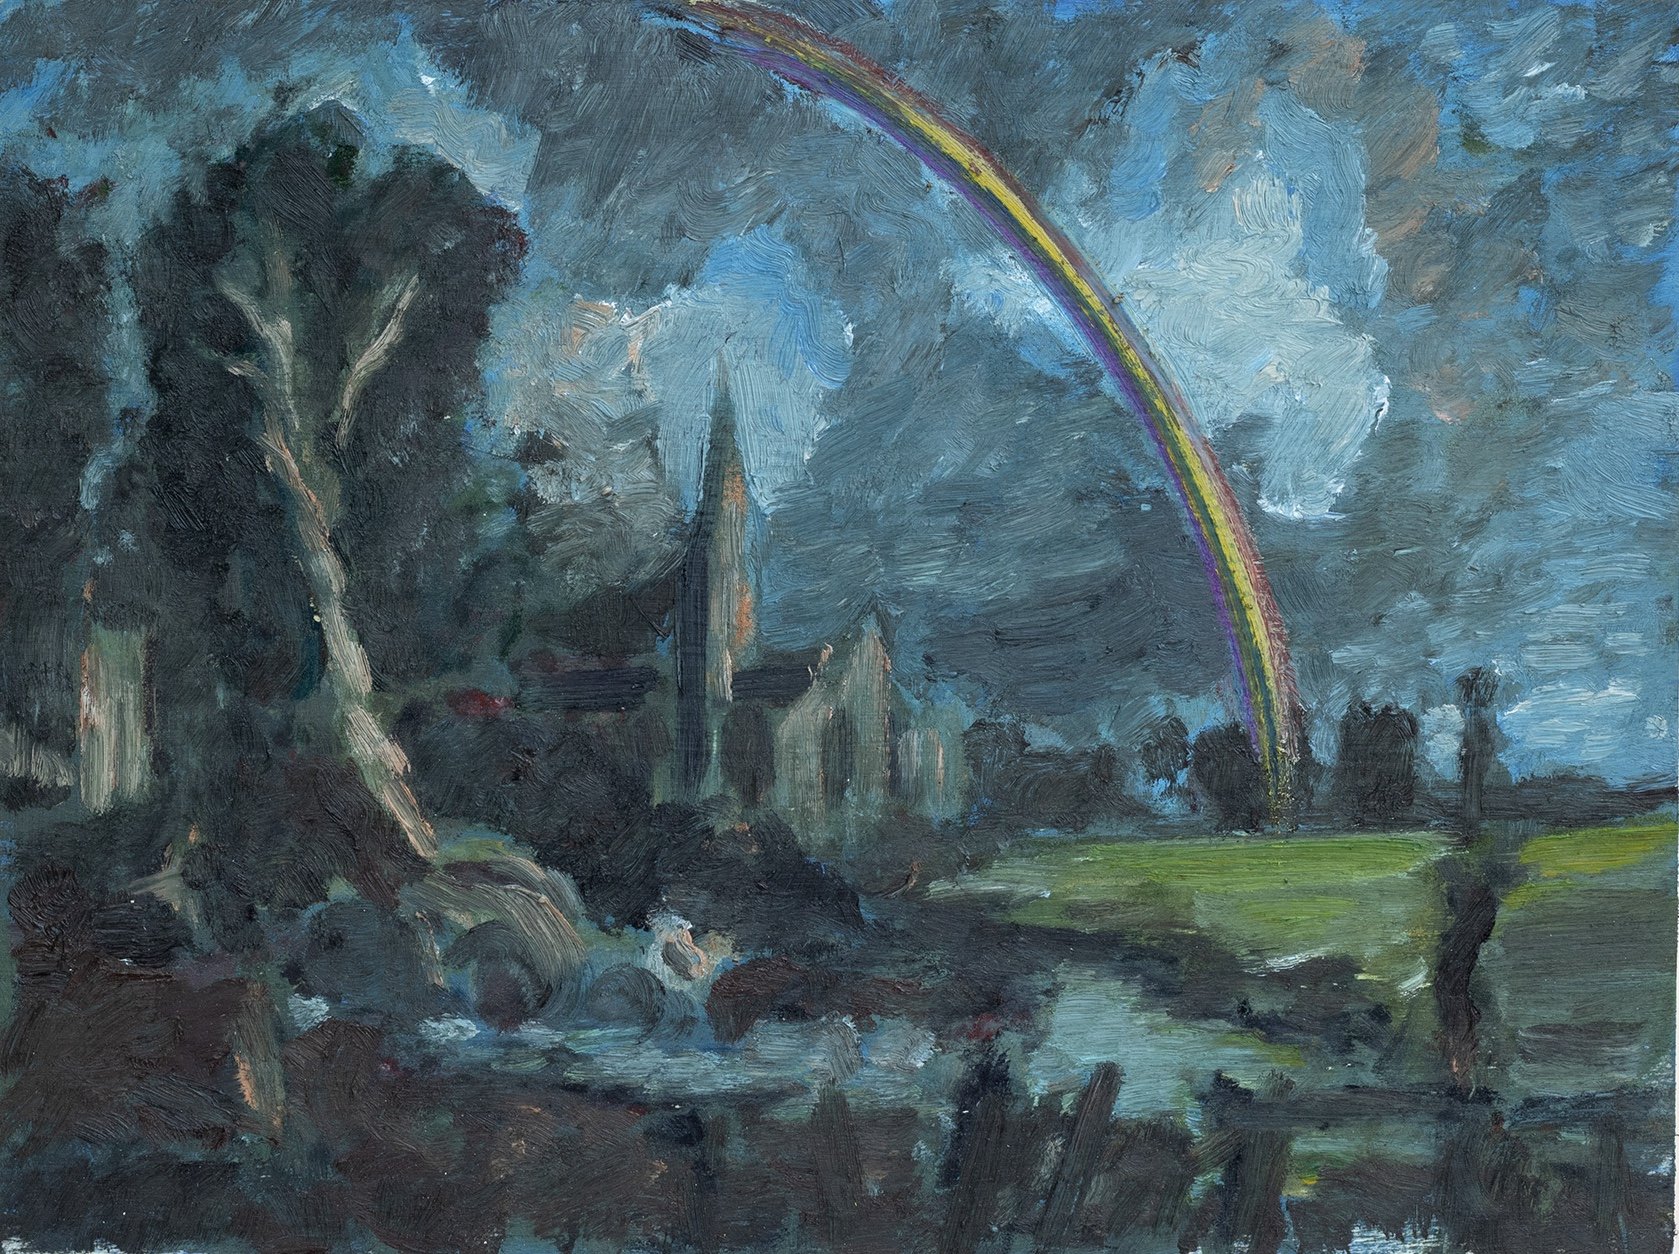 Salisbury Cathedral from the Meadows II (after Constable), 2020